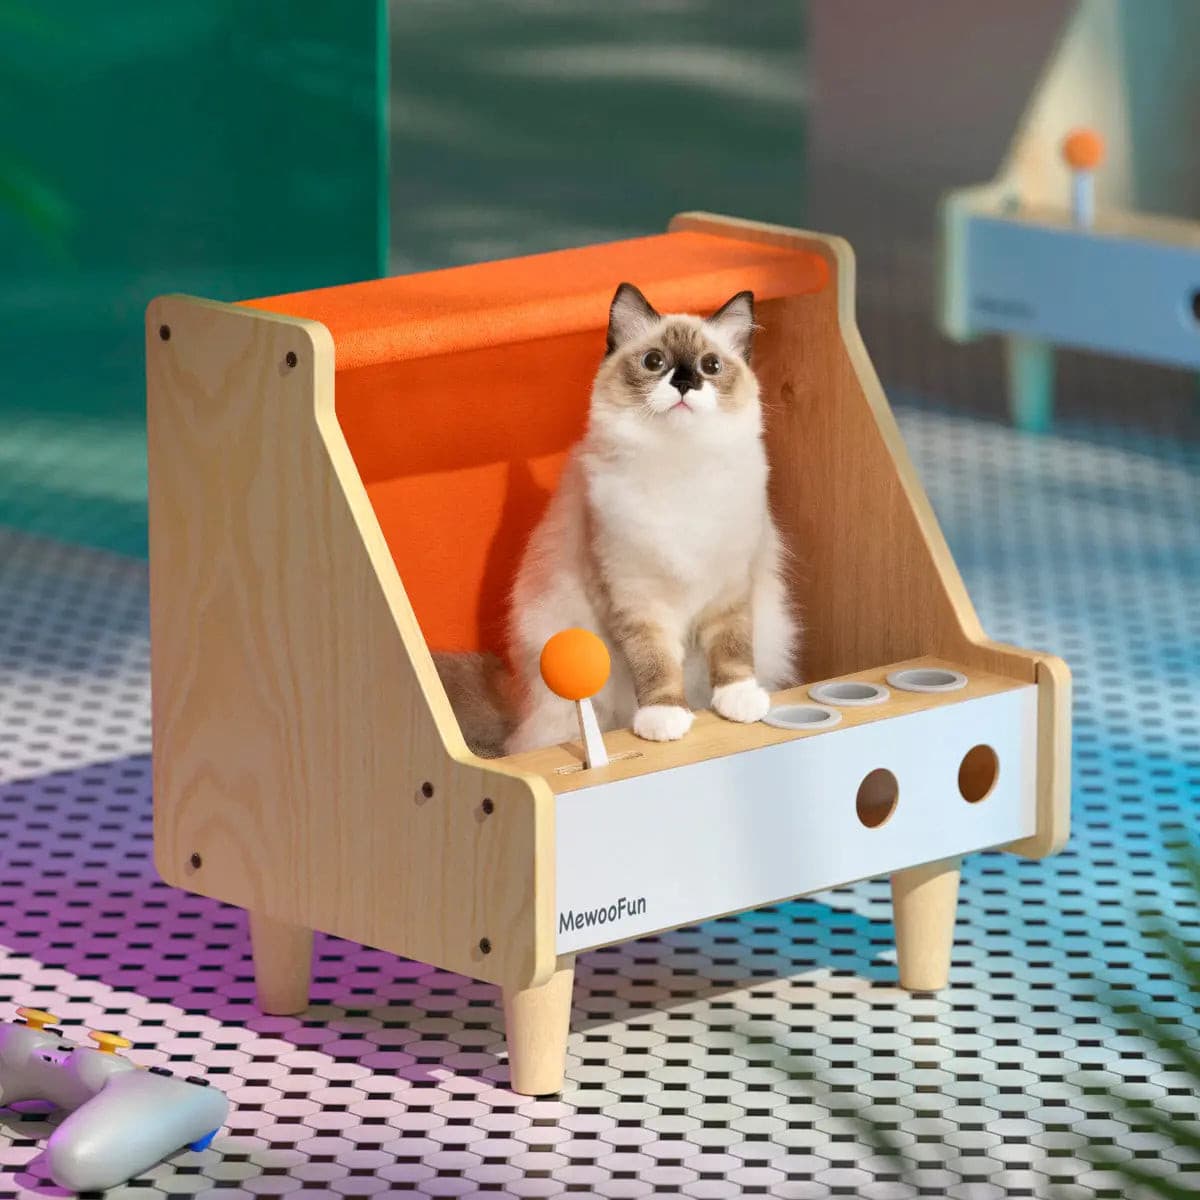 SupermarCat Multi-function Gmae Machine Cat Indoor Wooden House with Toy Scratcher MewooFun